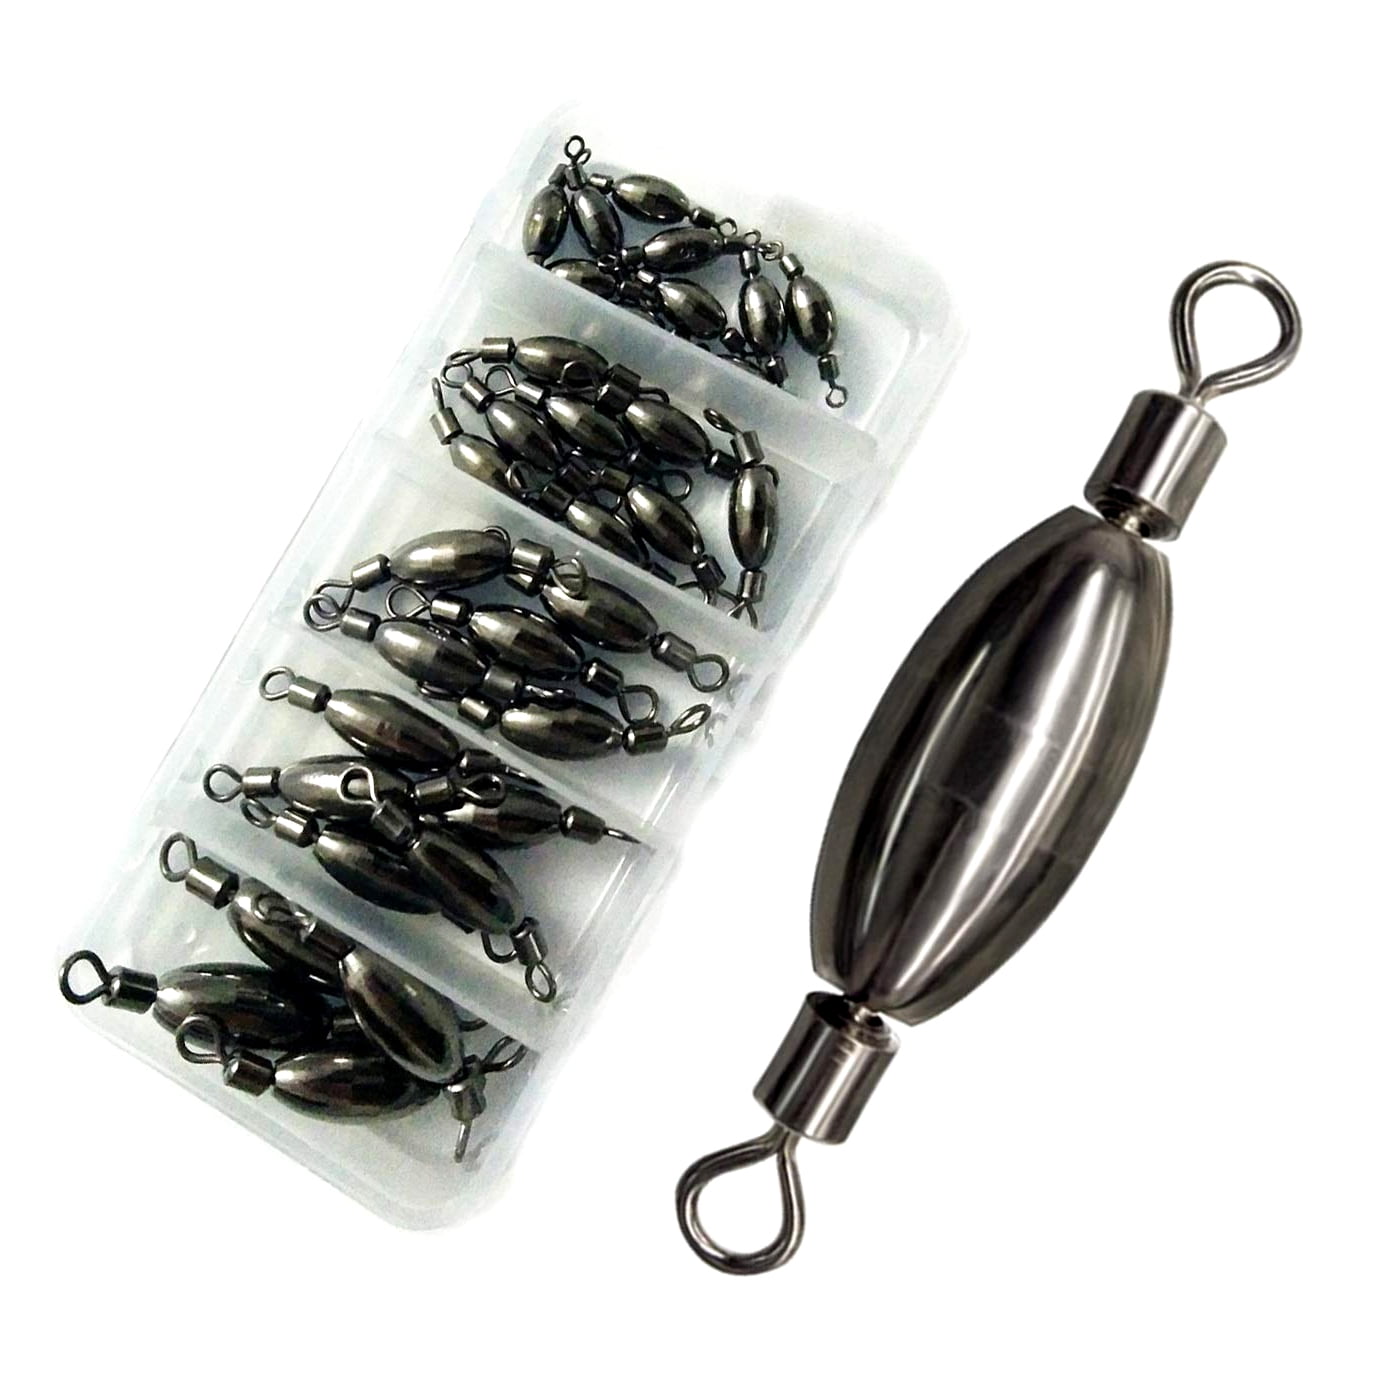 Avlcoaky Fishing Weights Sinkers Egg Sinkers with Inner Swivel Saltwater Inline Trolling Swivel Weights 